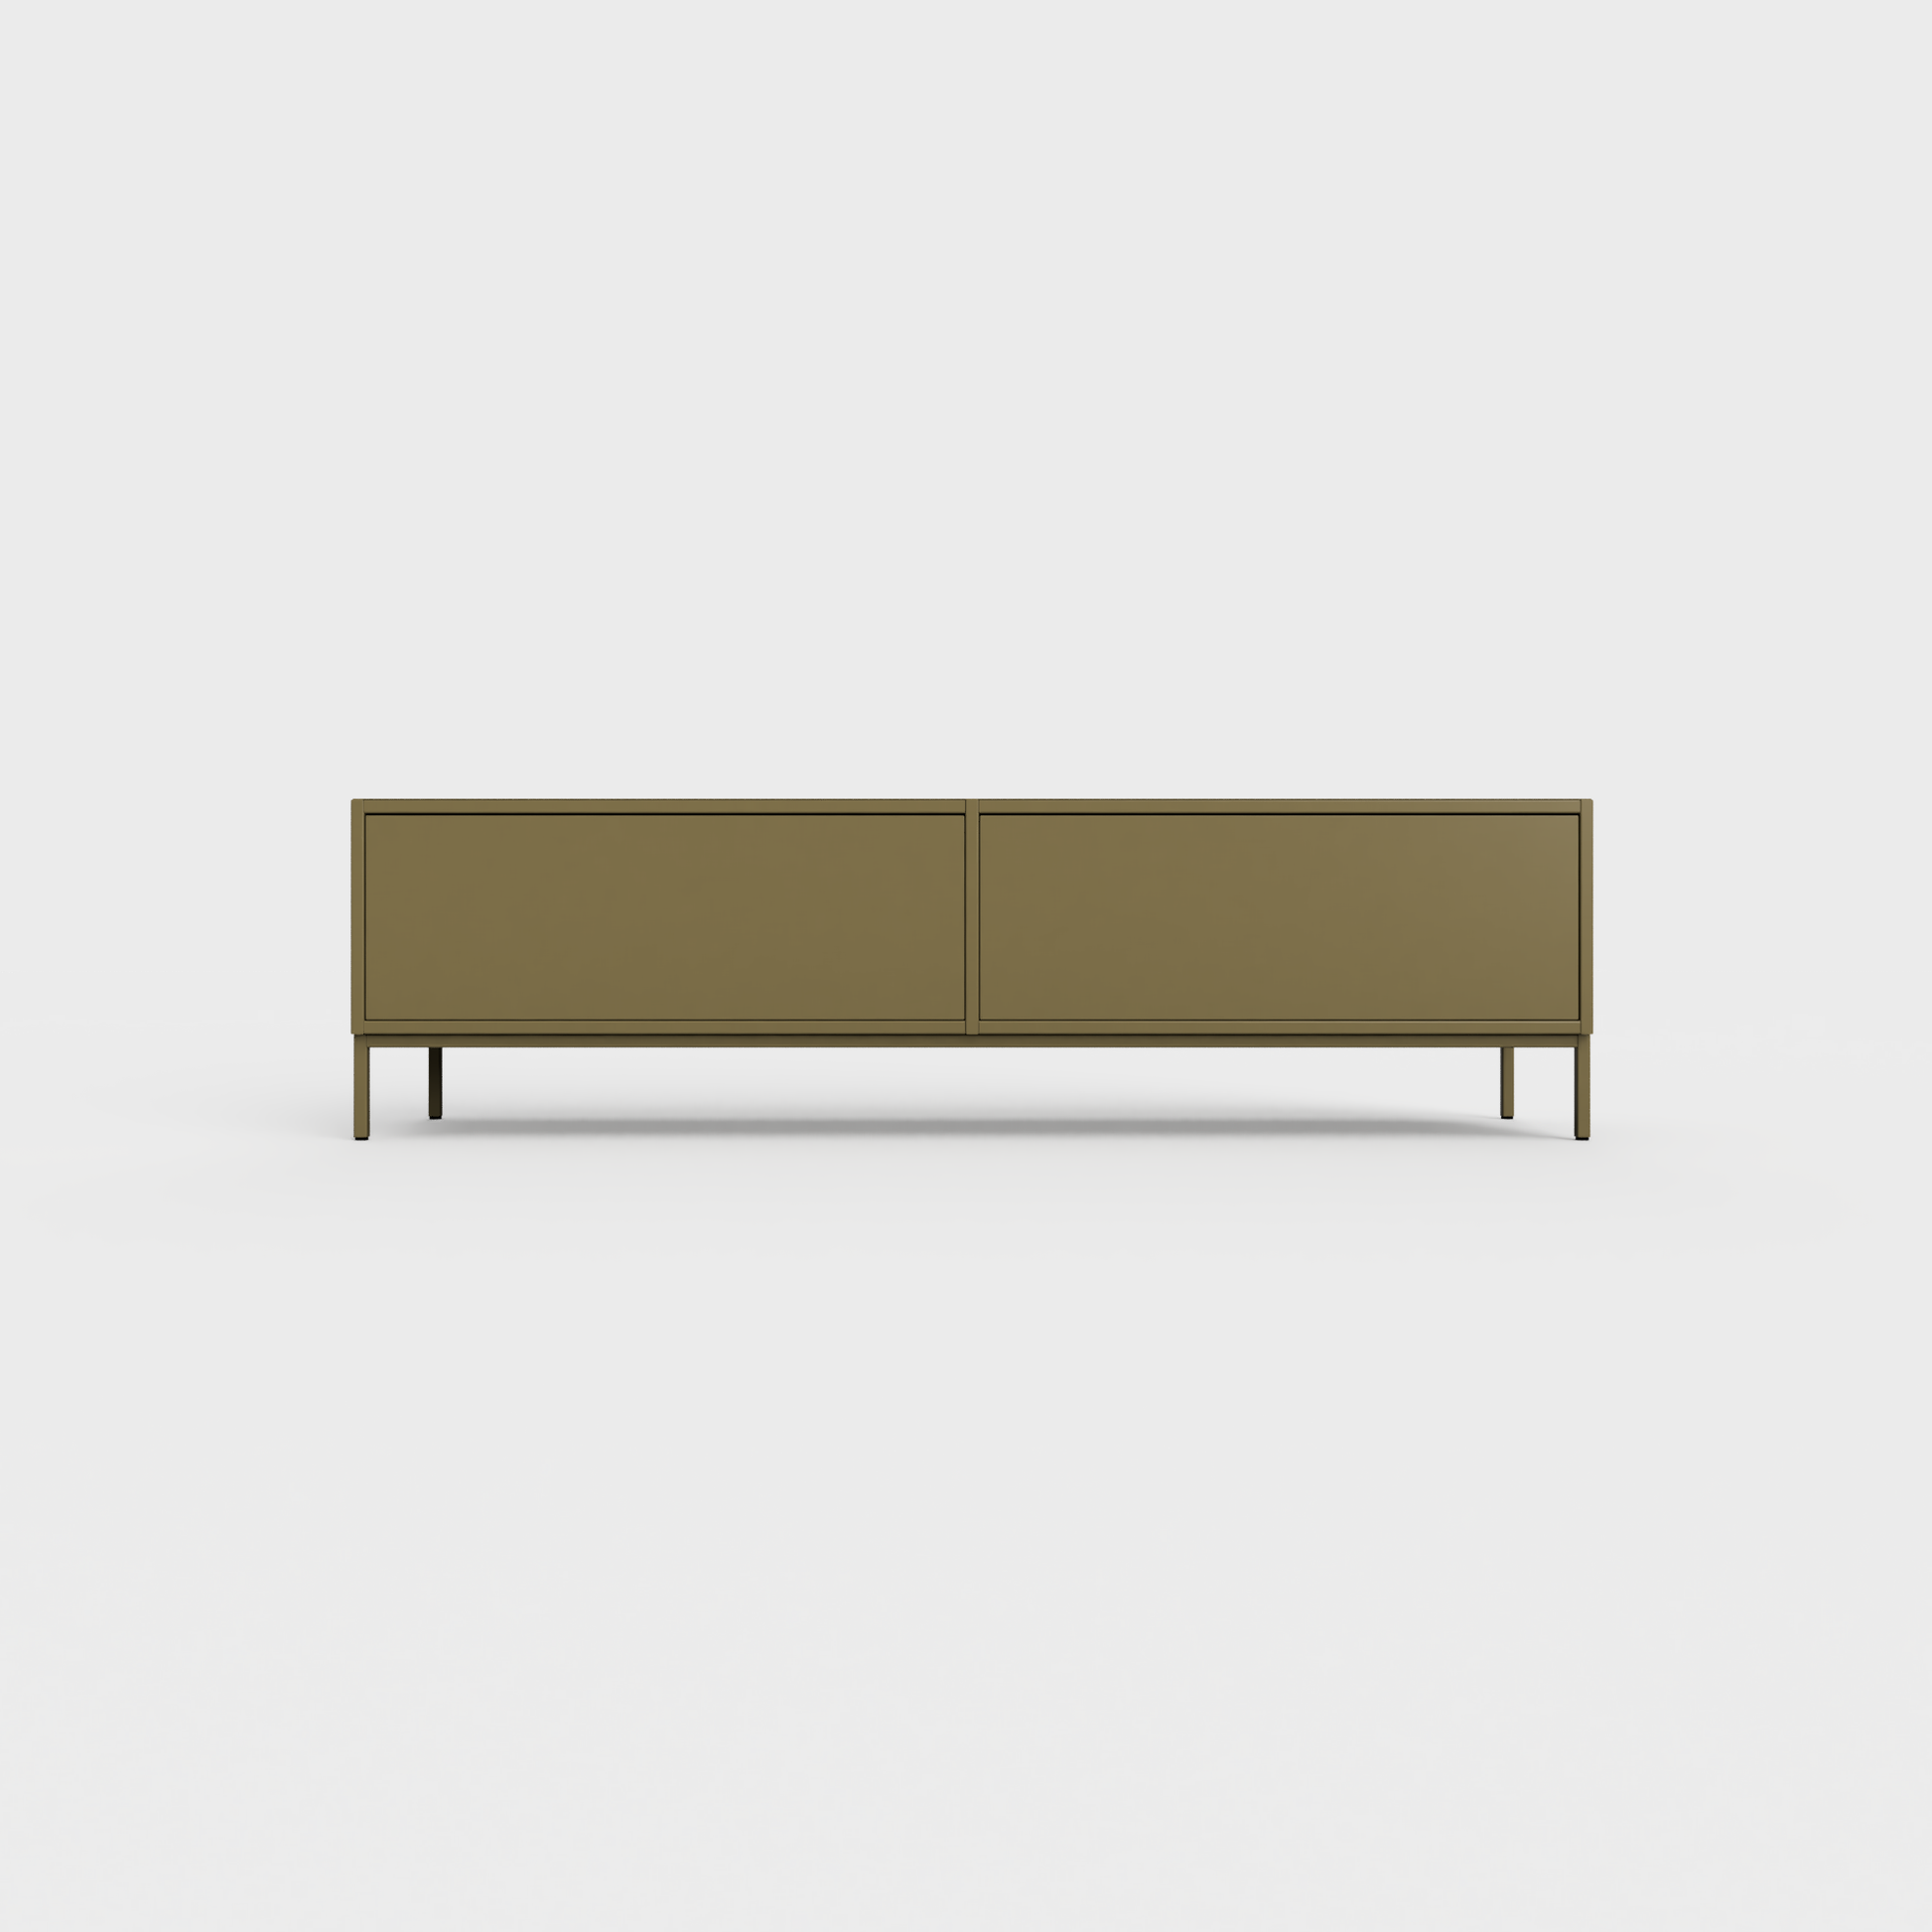 Prunus 01 Lowboard in Brown Olive color, powder-coated steel, elegant and modern piece of furniture for your living room